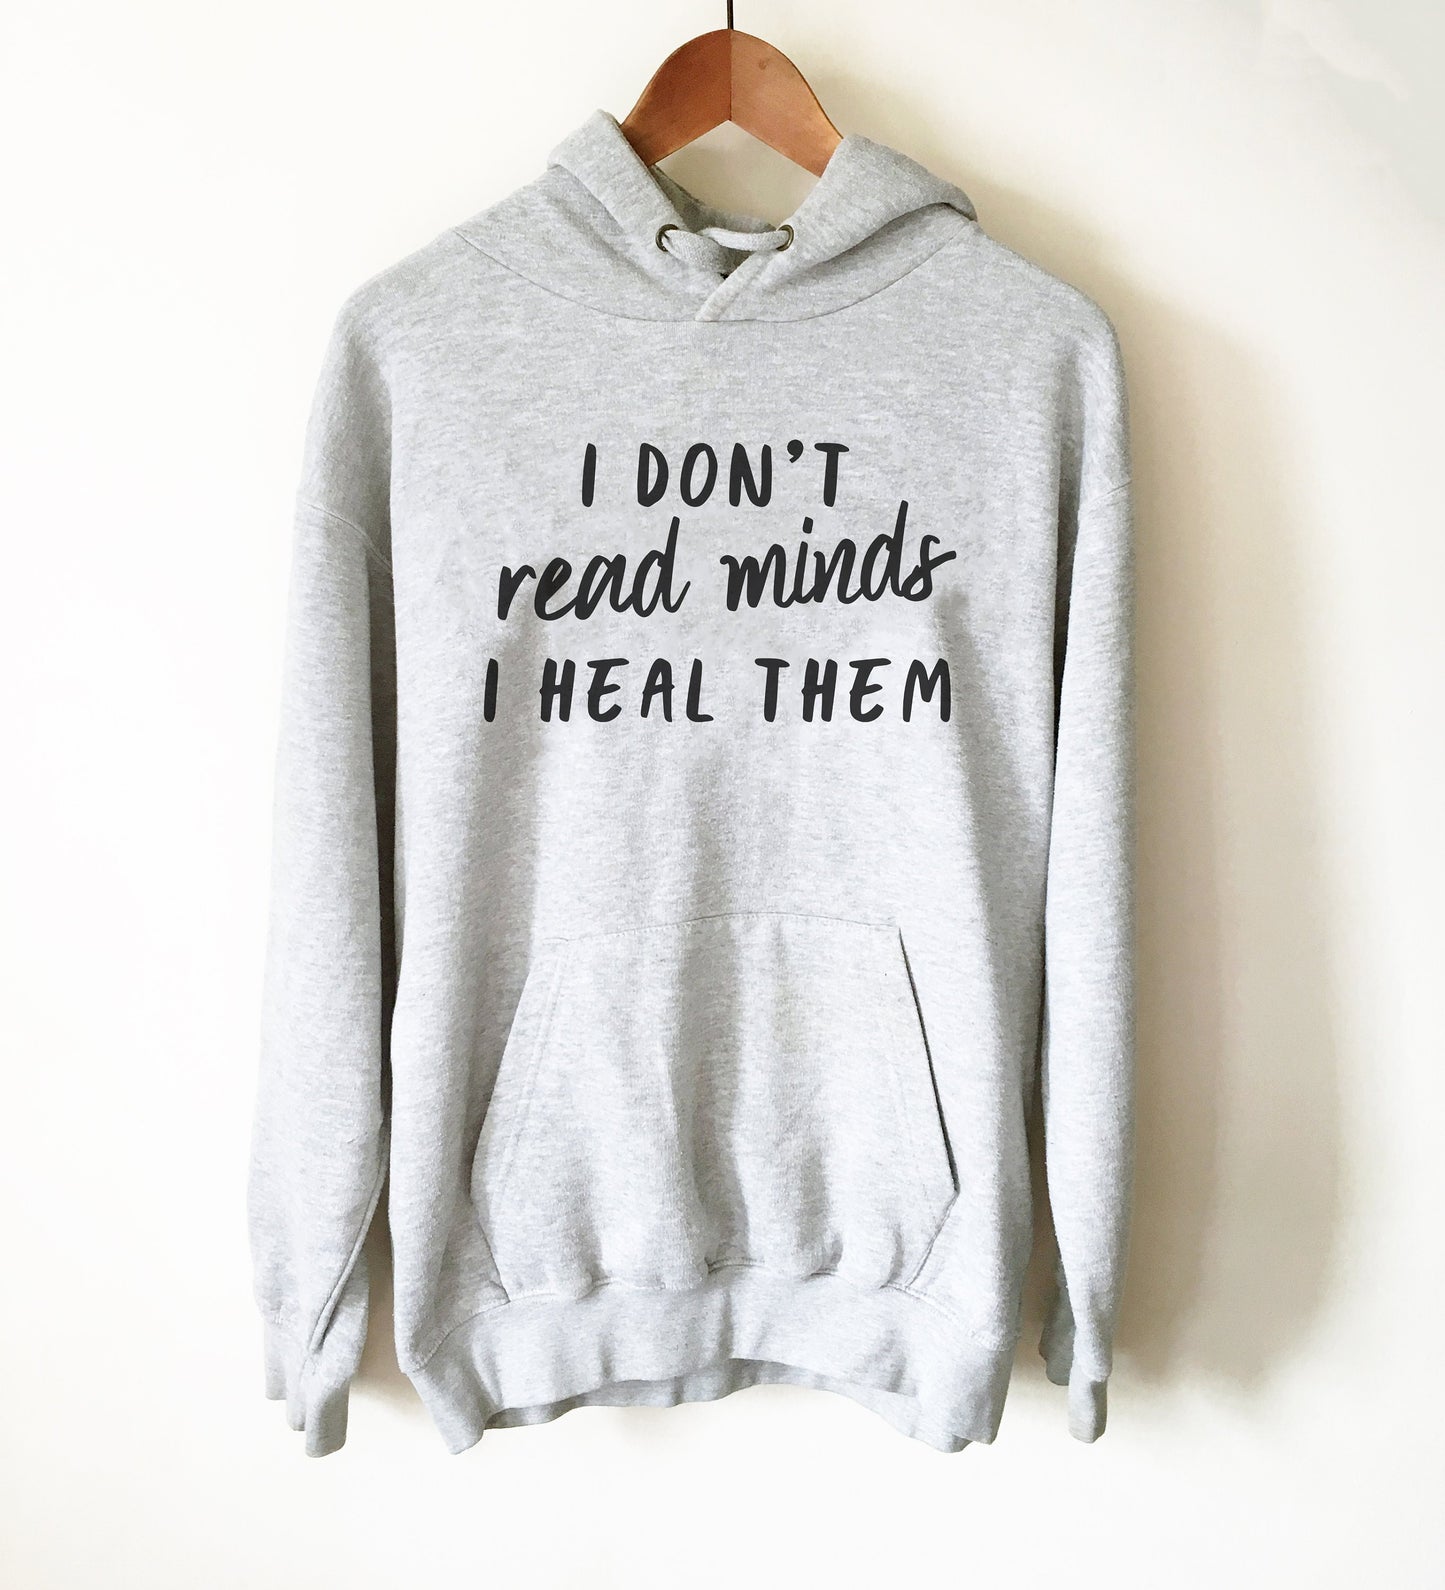 I Don't Read Minds I Heal Them Hoodie - Psychologist T-Shirt, Psychologist Gift, Psychology Gifts, Psychology Student, Counselor Shirt